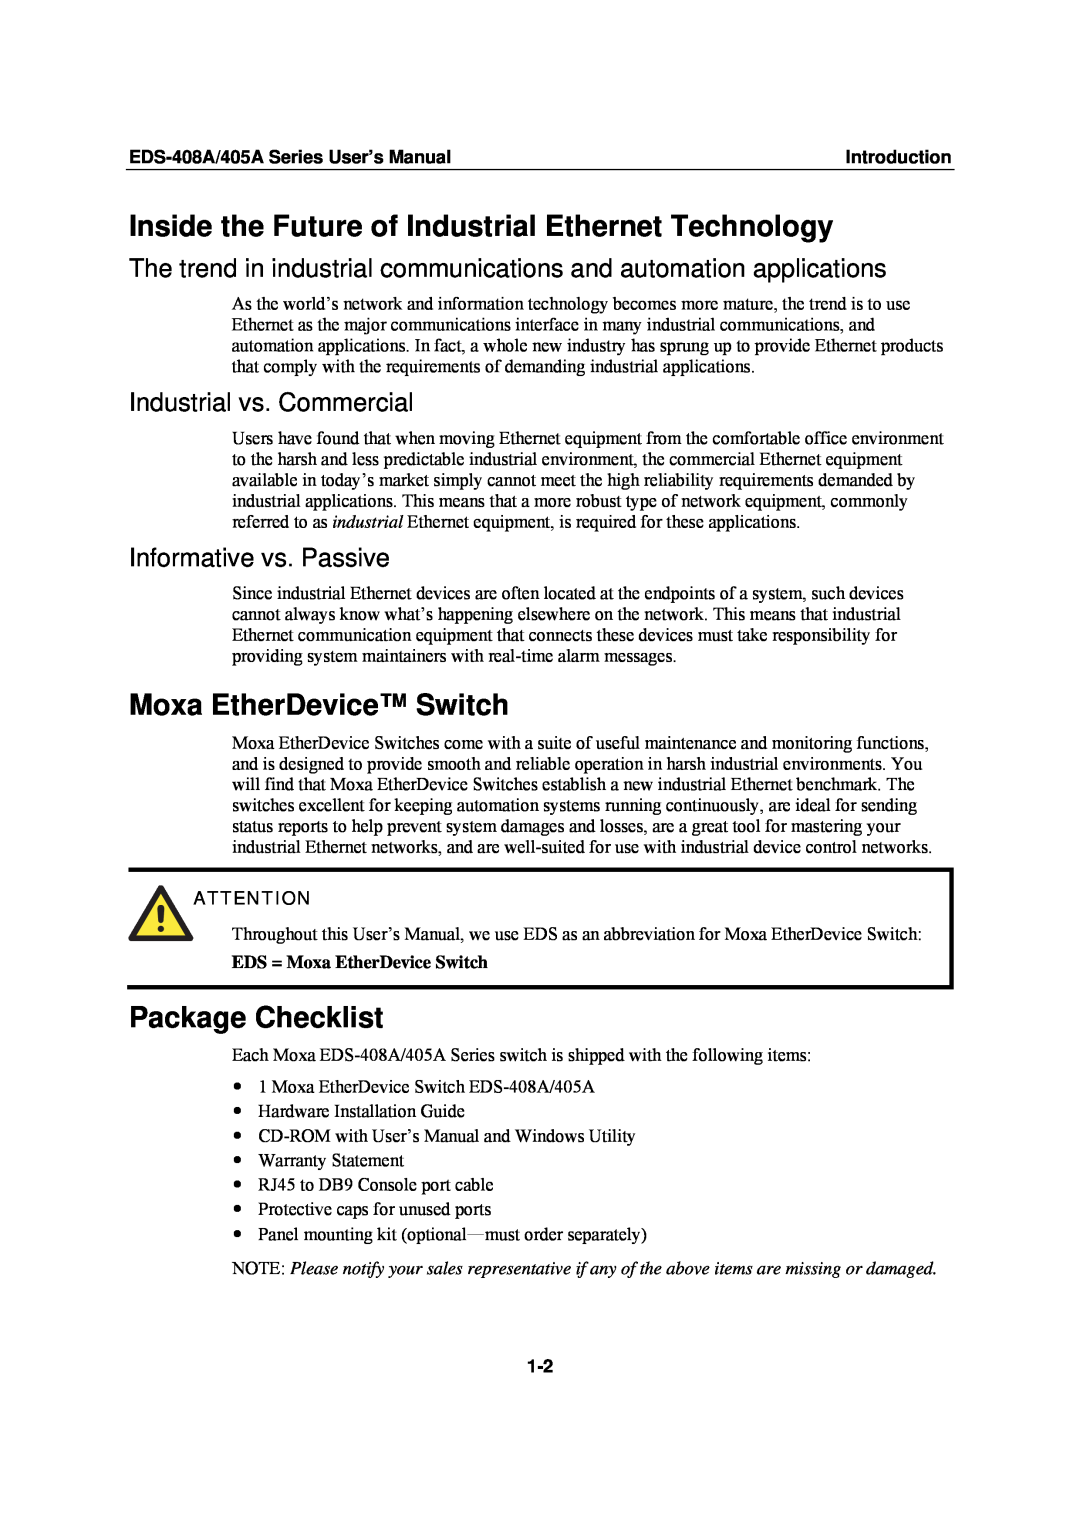 Moxa Technologies EDS-408A Inside the Future of Industrial Ethernet Technology, Moxa EtherDevice Switch, Package Checklist 